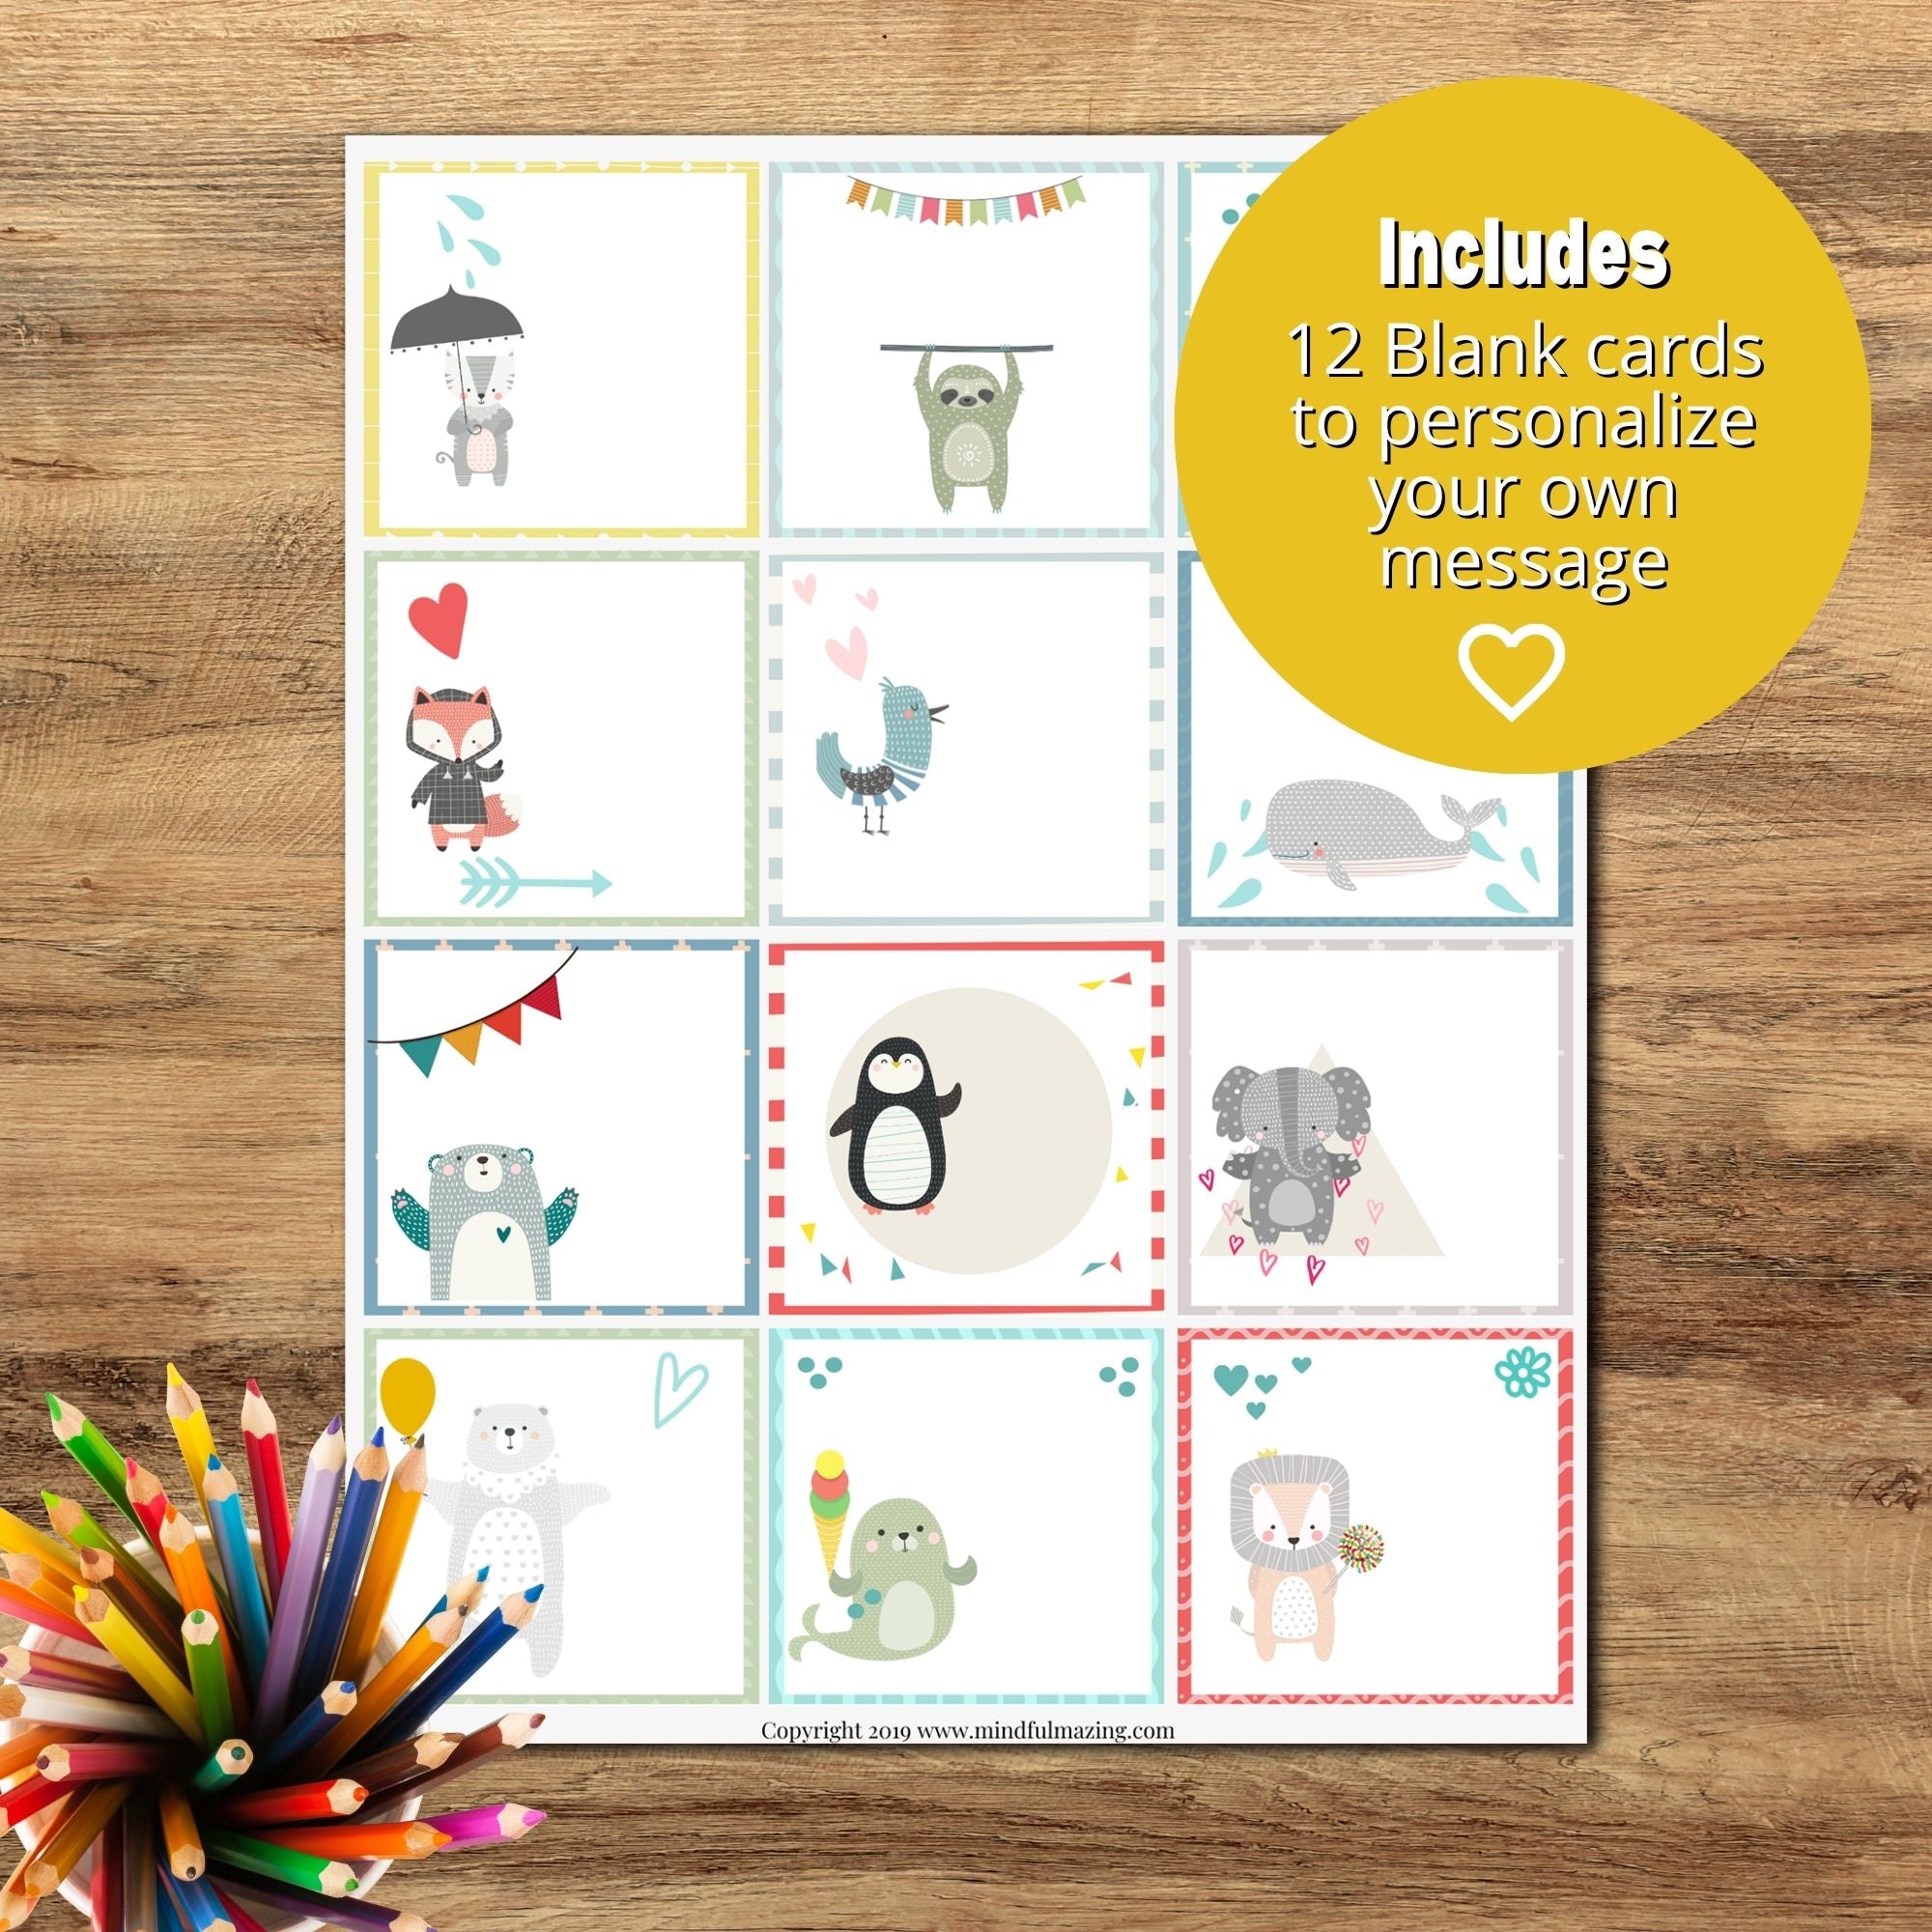 100+ Lunchbox Notes For Kids (PDF)